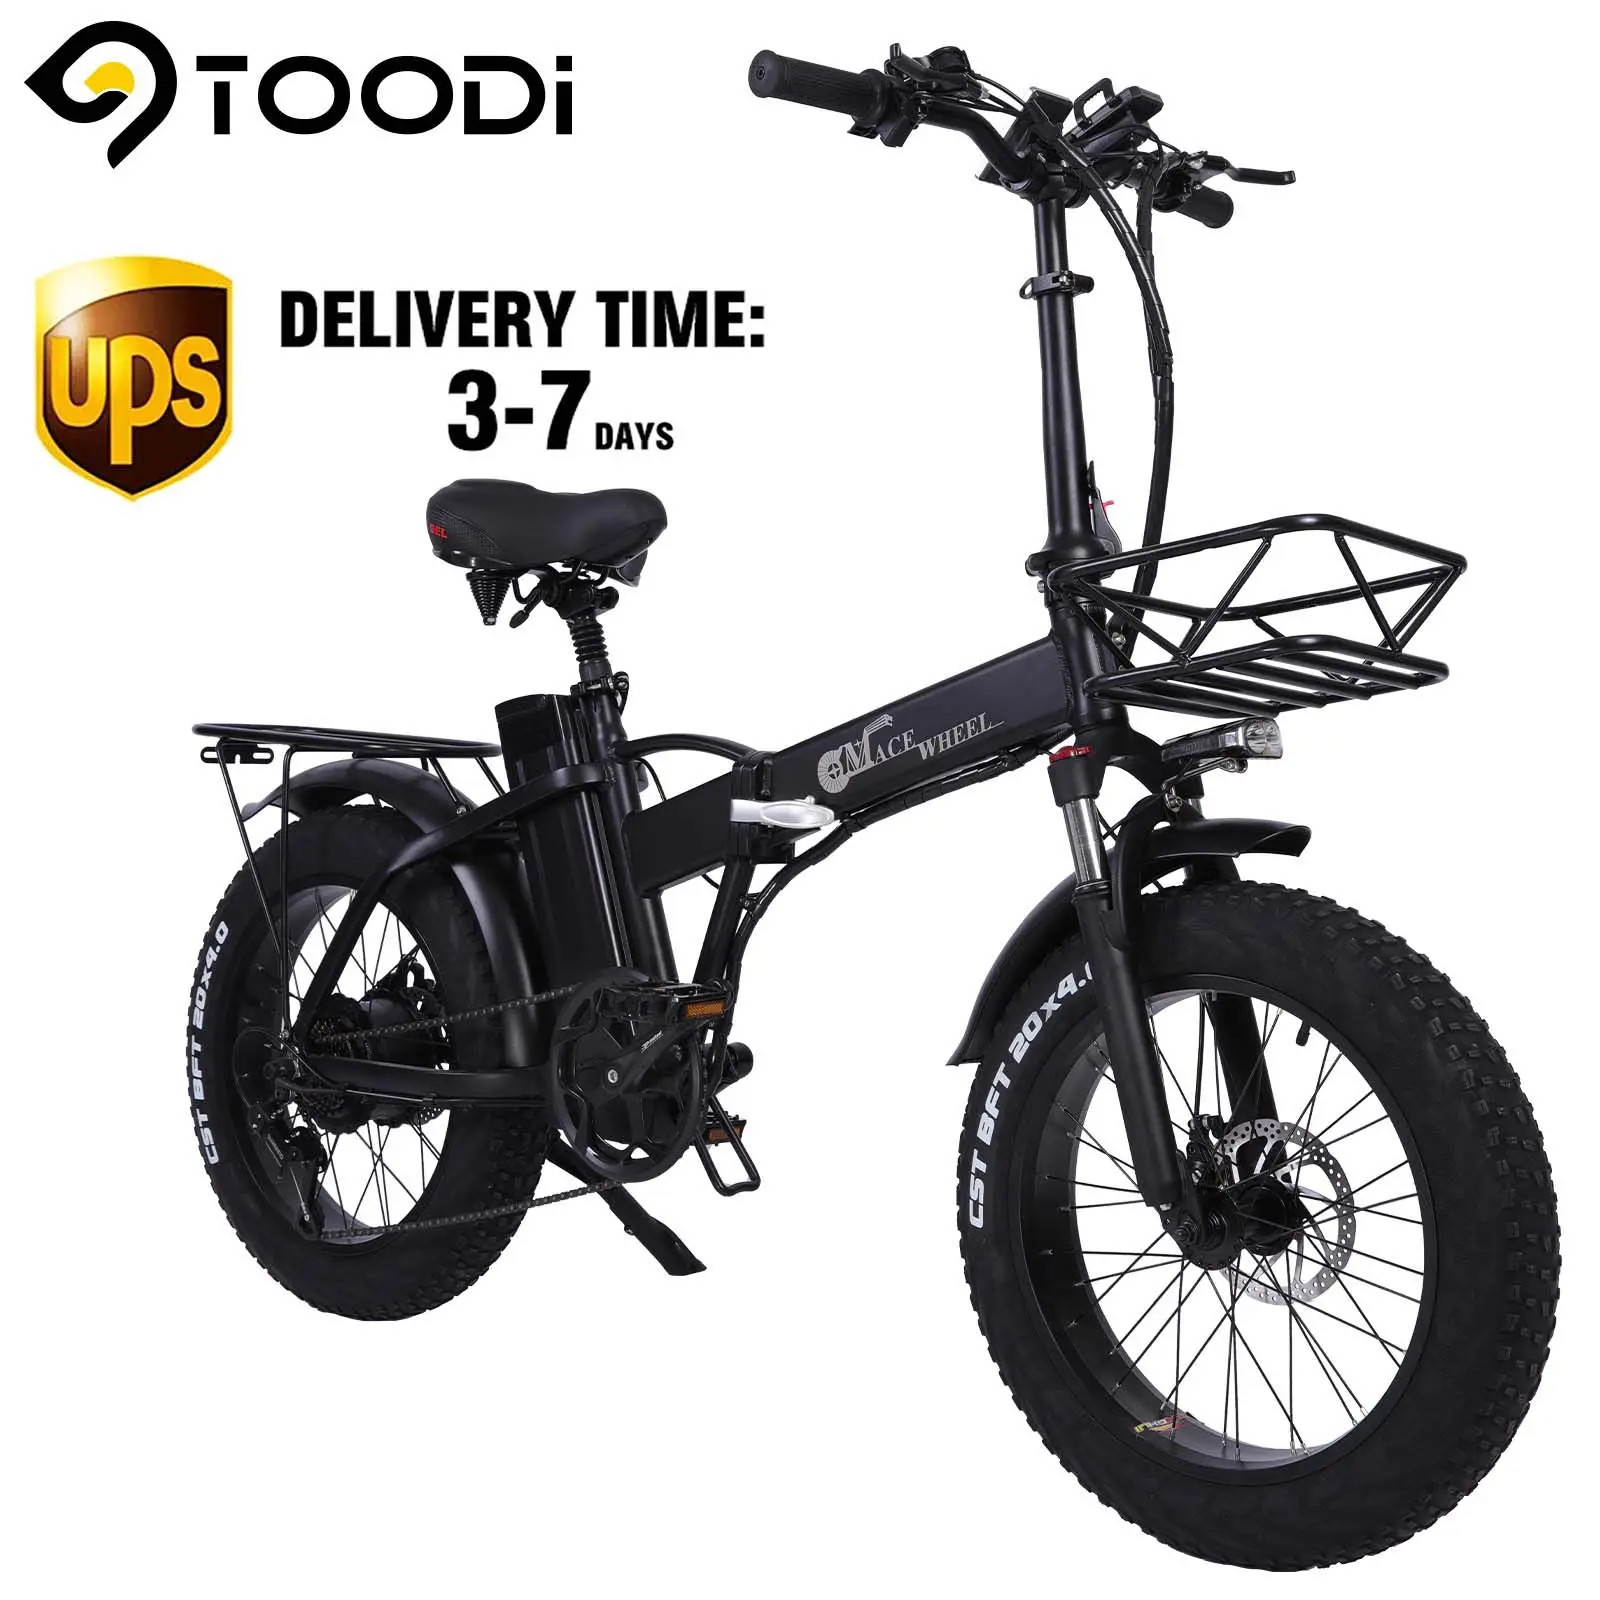 

2021 Aluminum Alloy Factory City Public Sharing Electric Bike Bicycle 48v750w15Ah For Adults, Black white